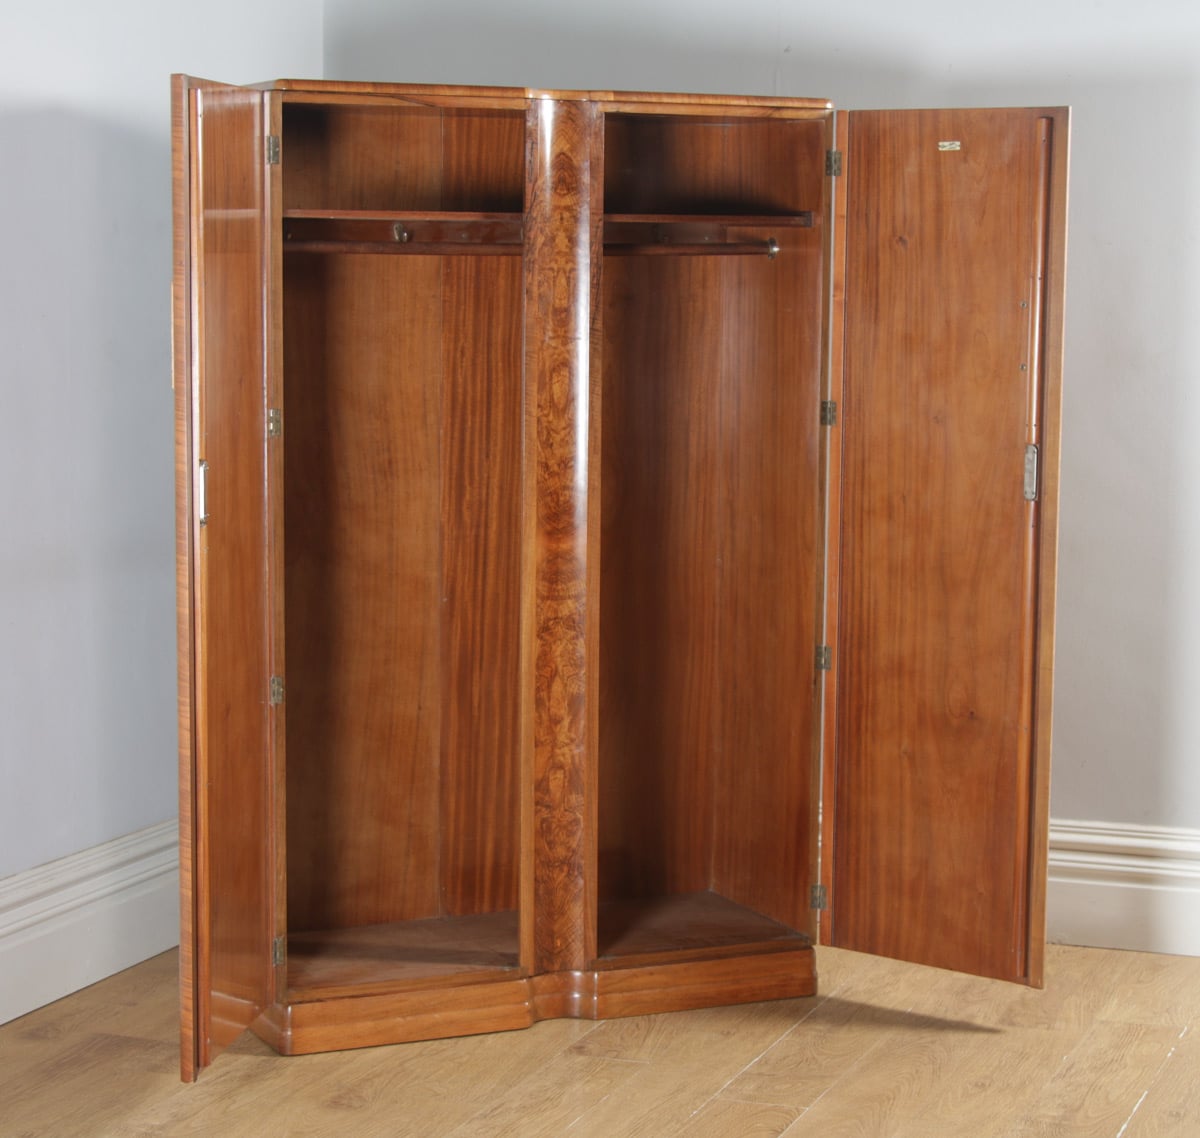 Details about   Antique Art Deco Burr Walnut 2 Door Armoire Wardrobe by Ray & Miles of Liverpool 